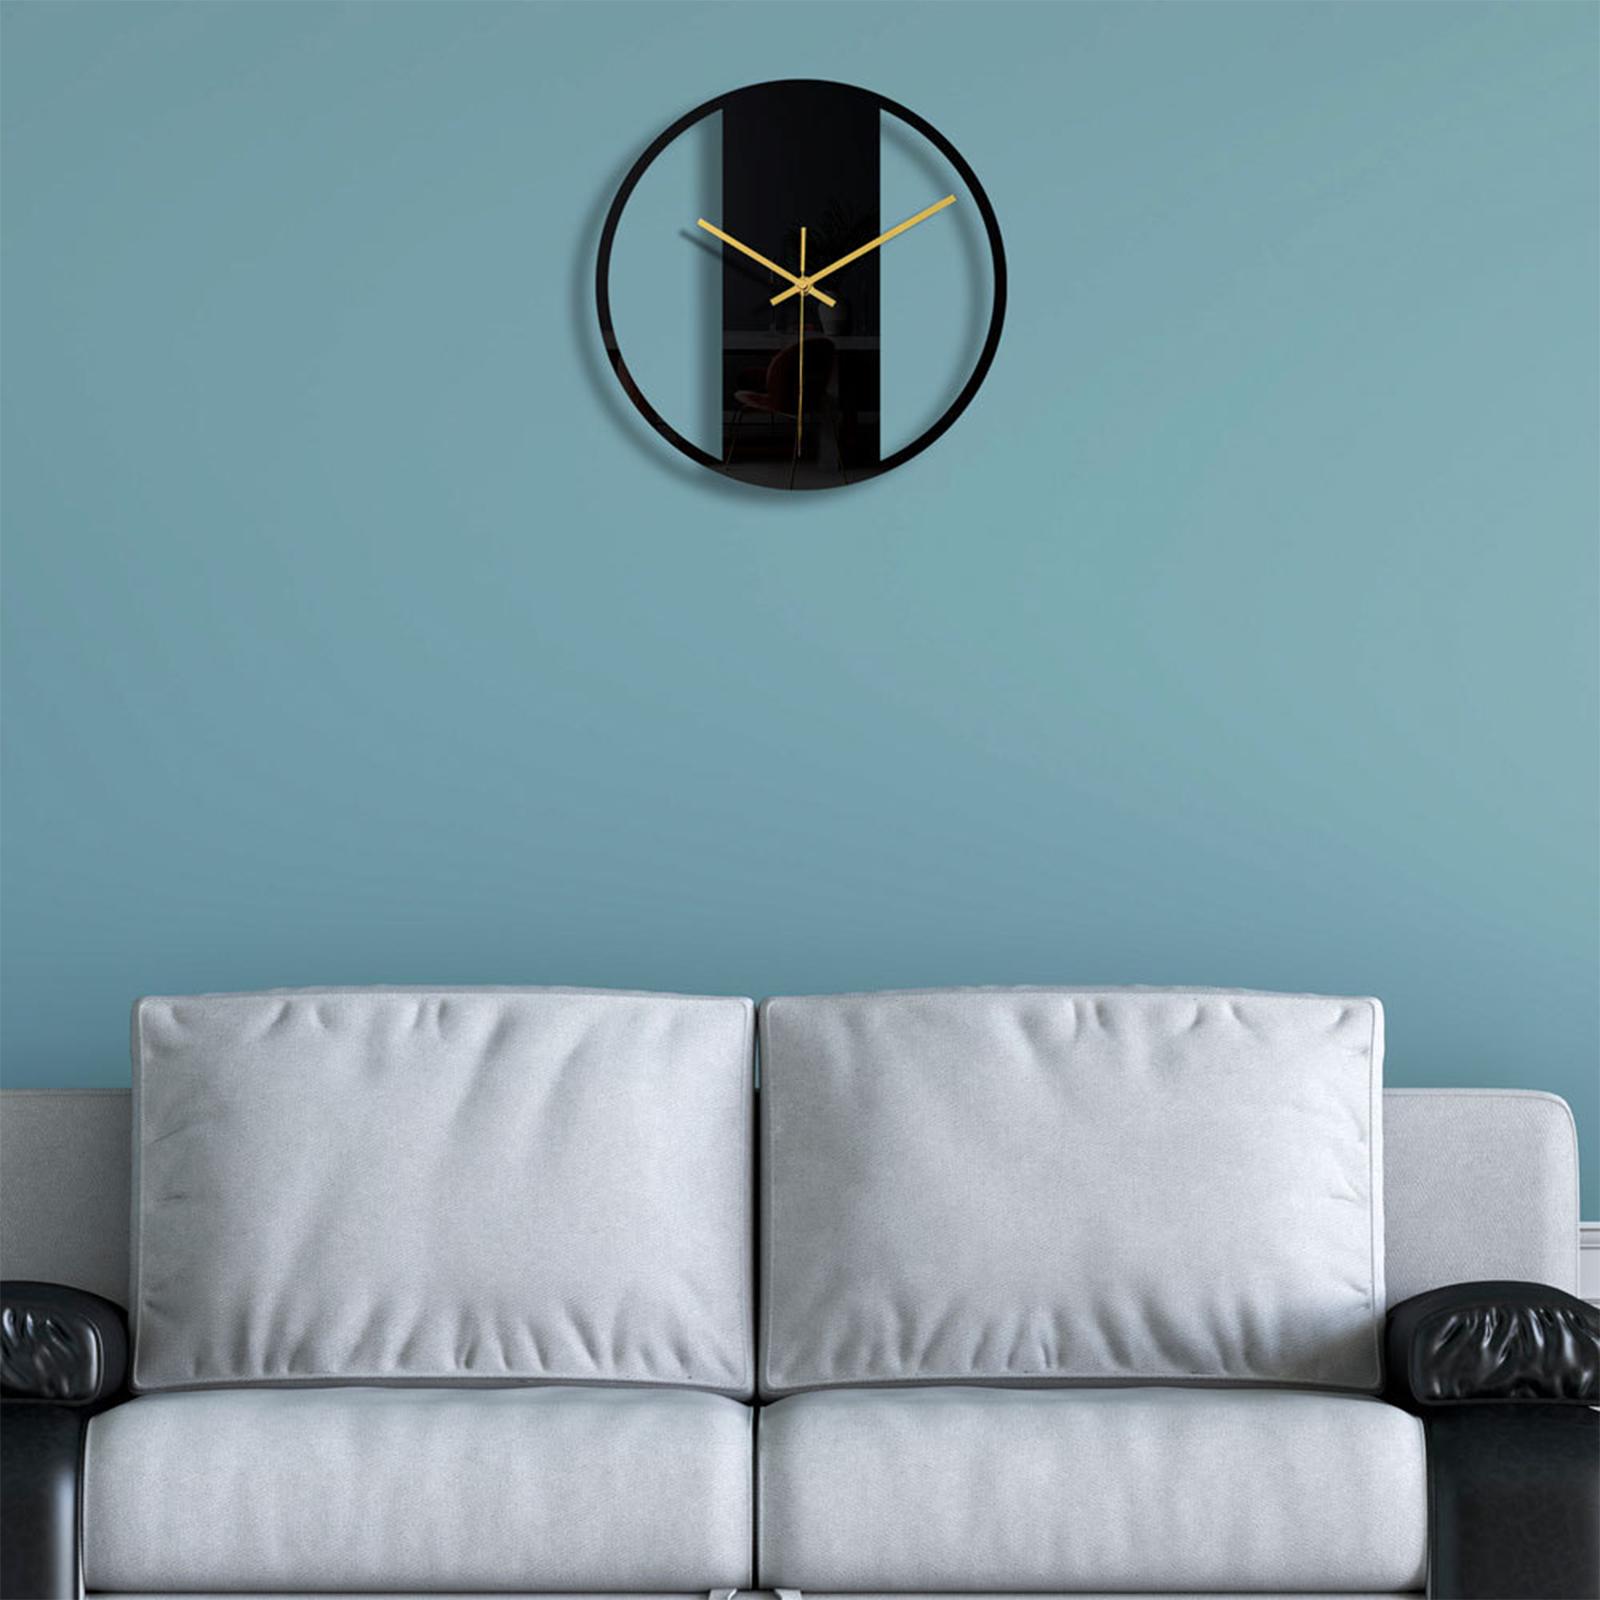 Wall Clock Battery Operated Mirror Surface Clocks Office Living Room Decor D